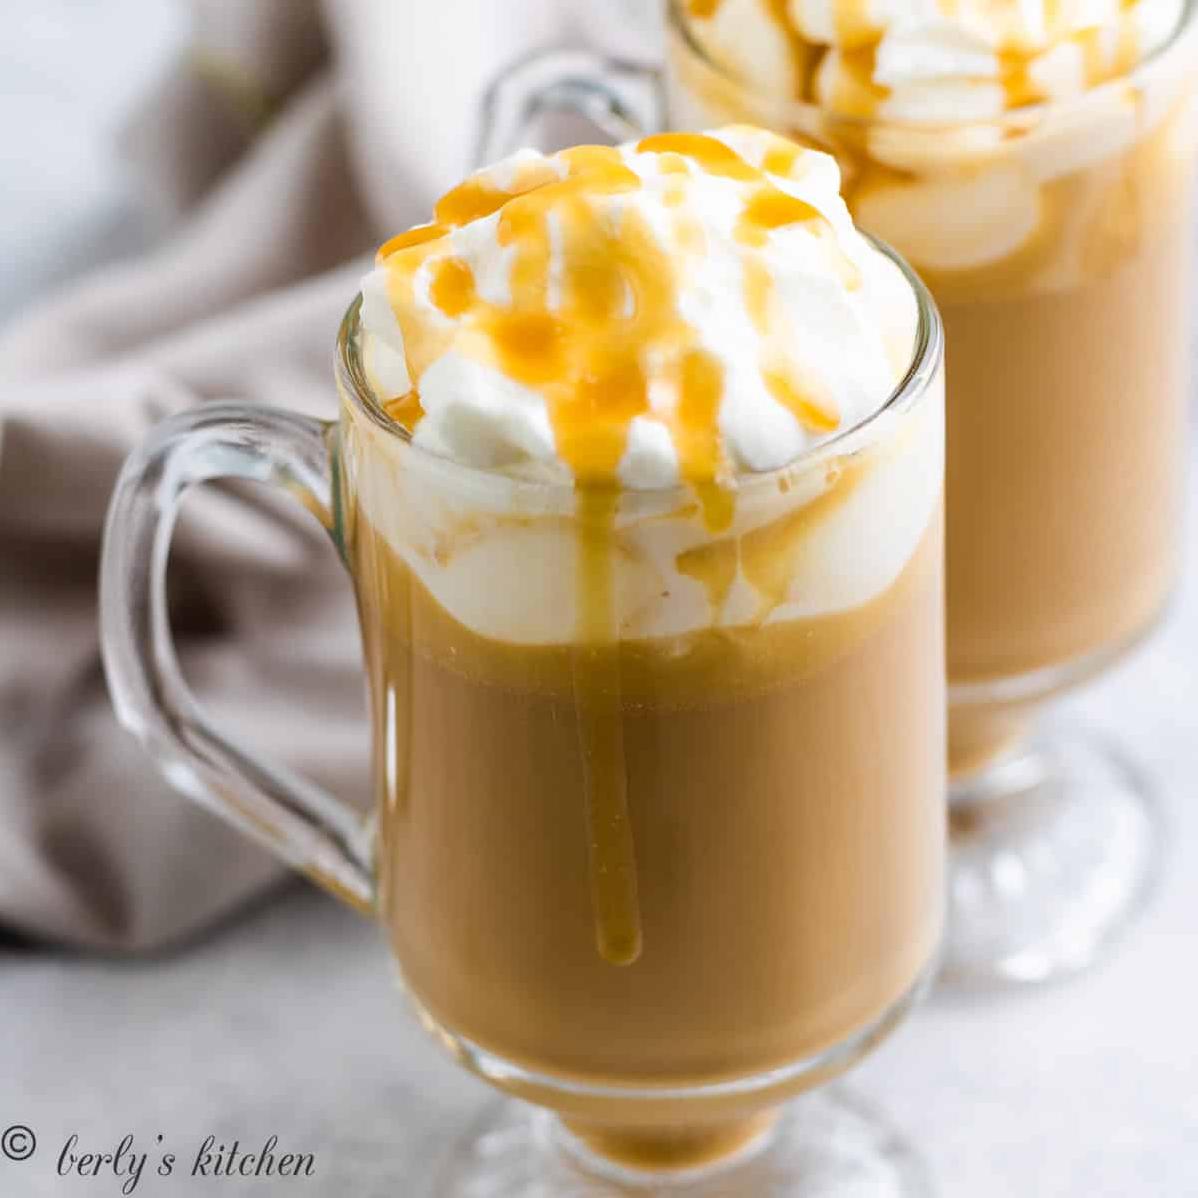  Take a sip of this rich and creamy butterscotch flavored coffee!